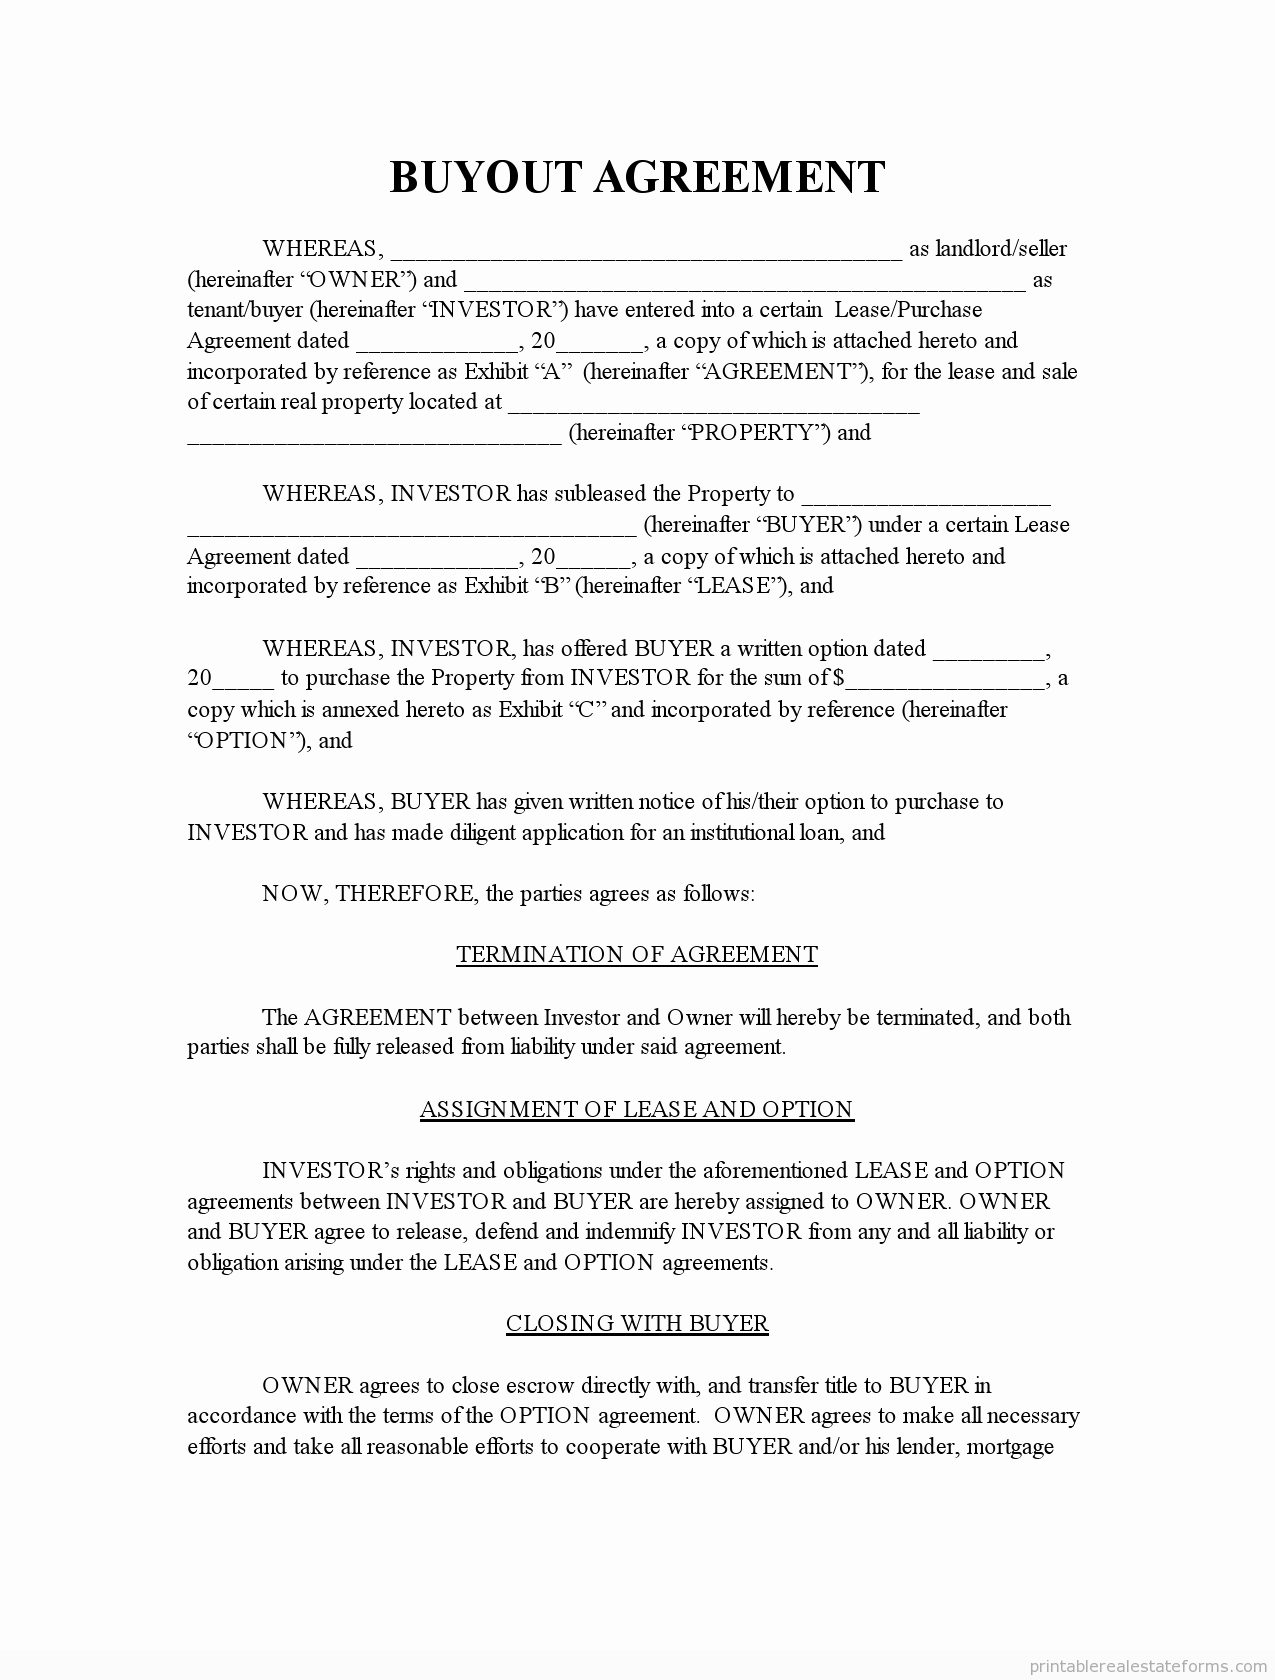 Home Buyout Agreement Template Luxury Free Buyout Agreement Template form Real Estate Pdf